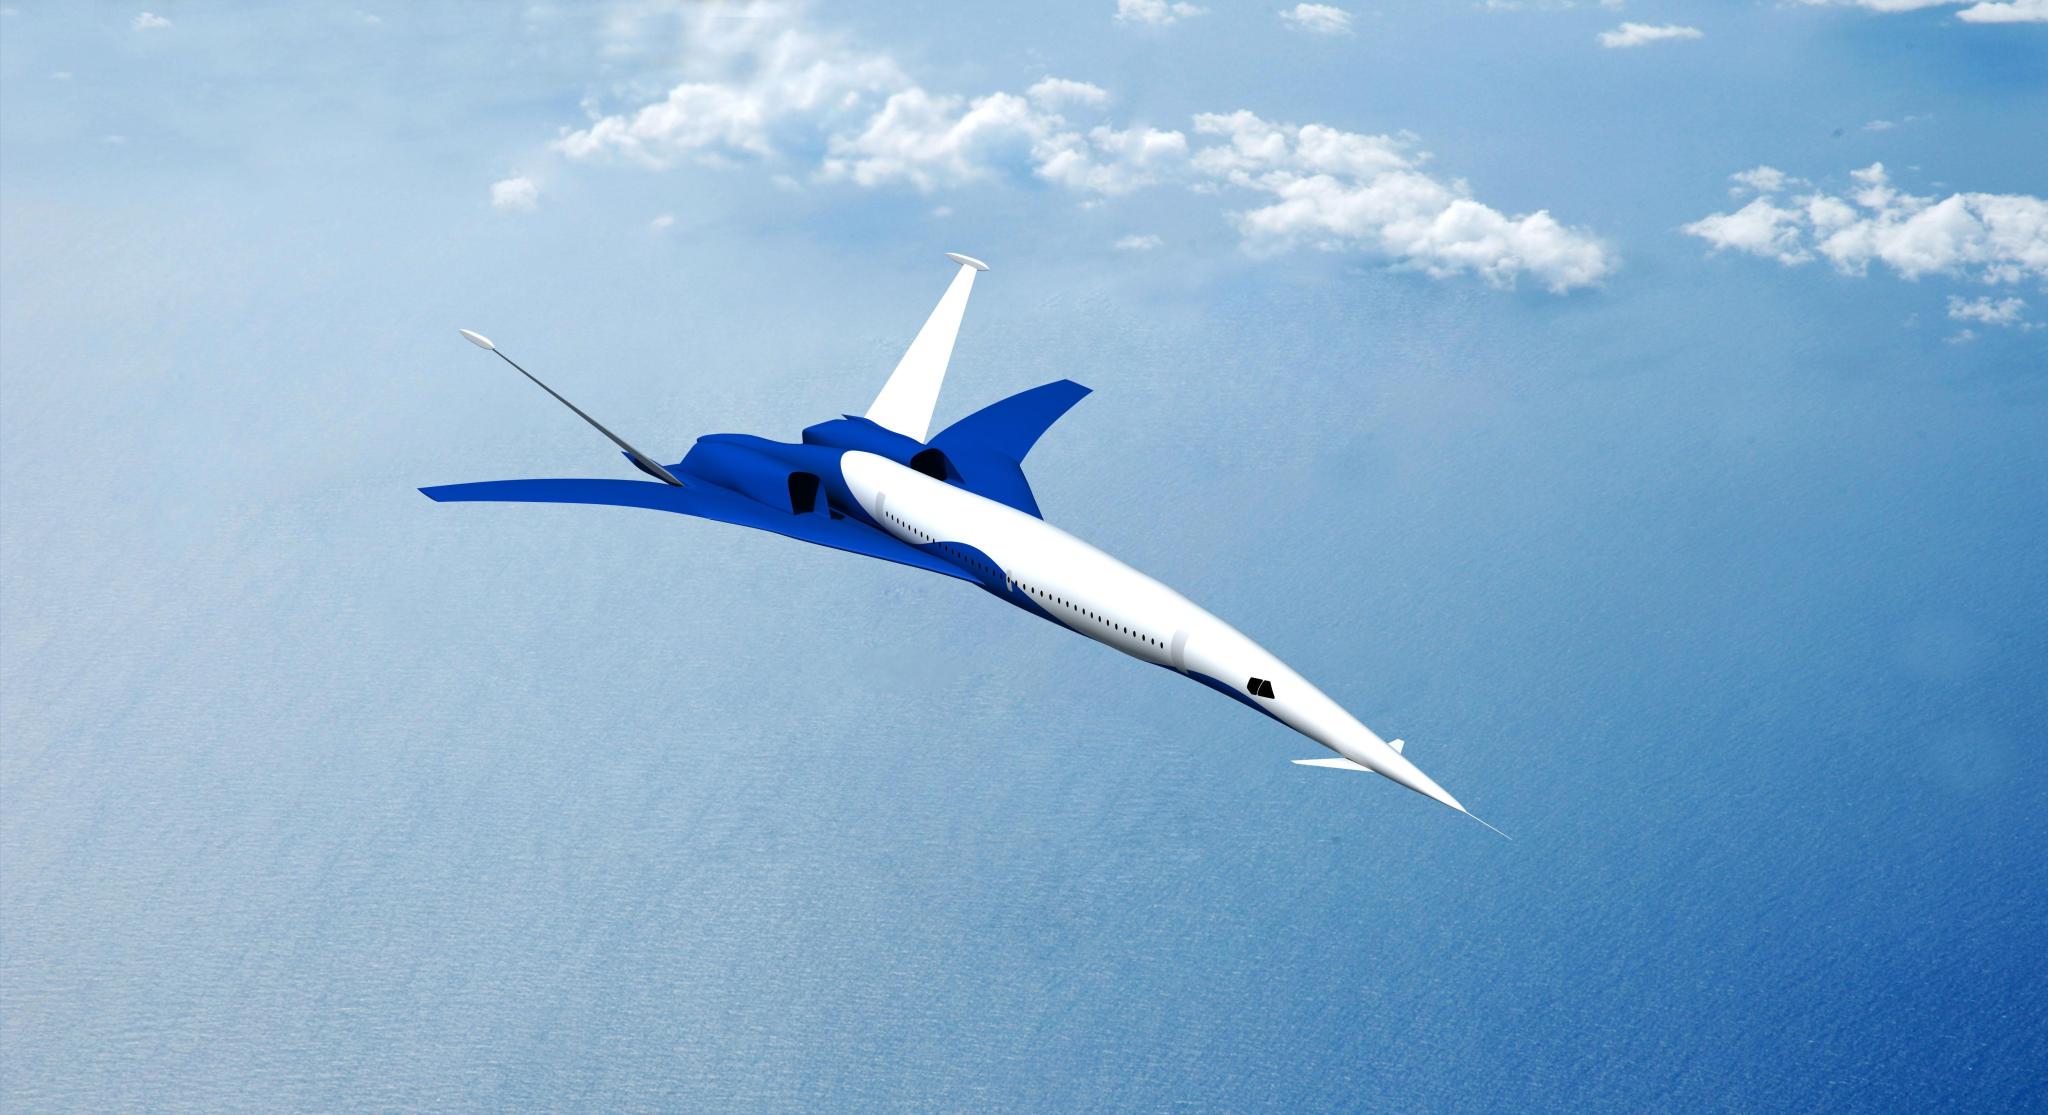 Concept design of blue and white aircraft in flight.